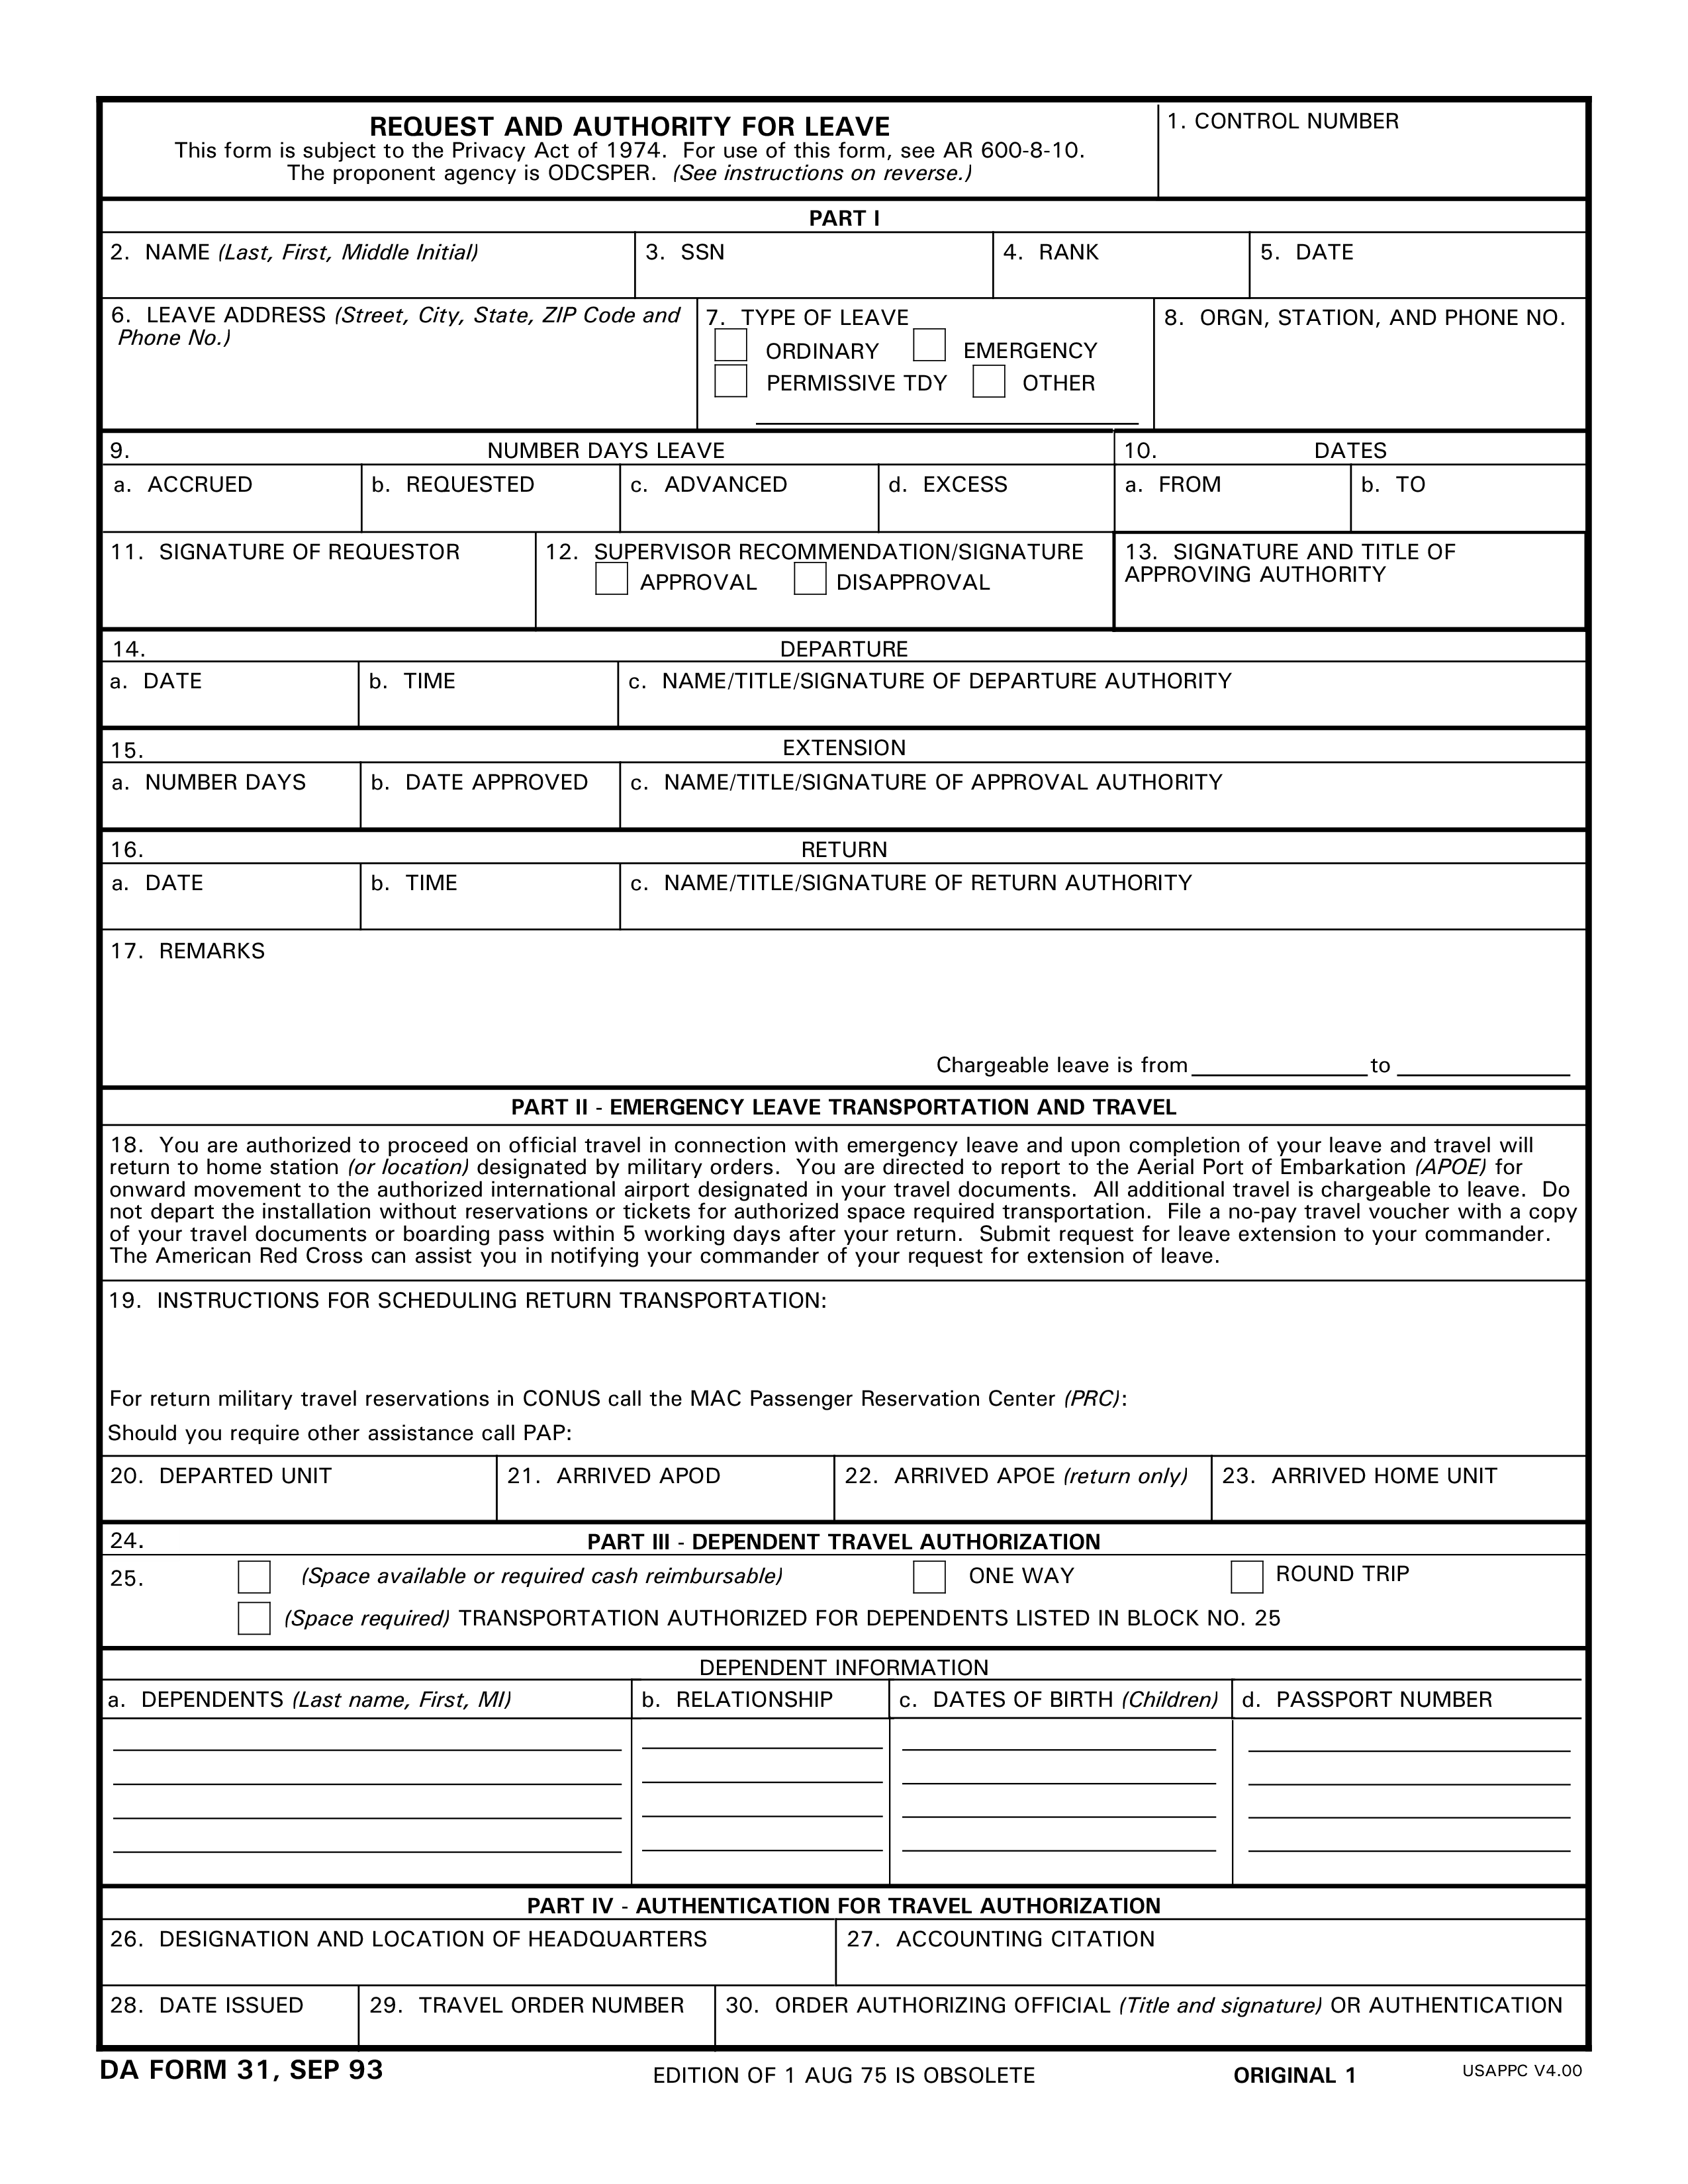 Request and Authority For Leave form template main image